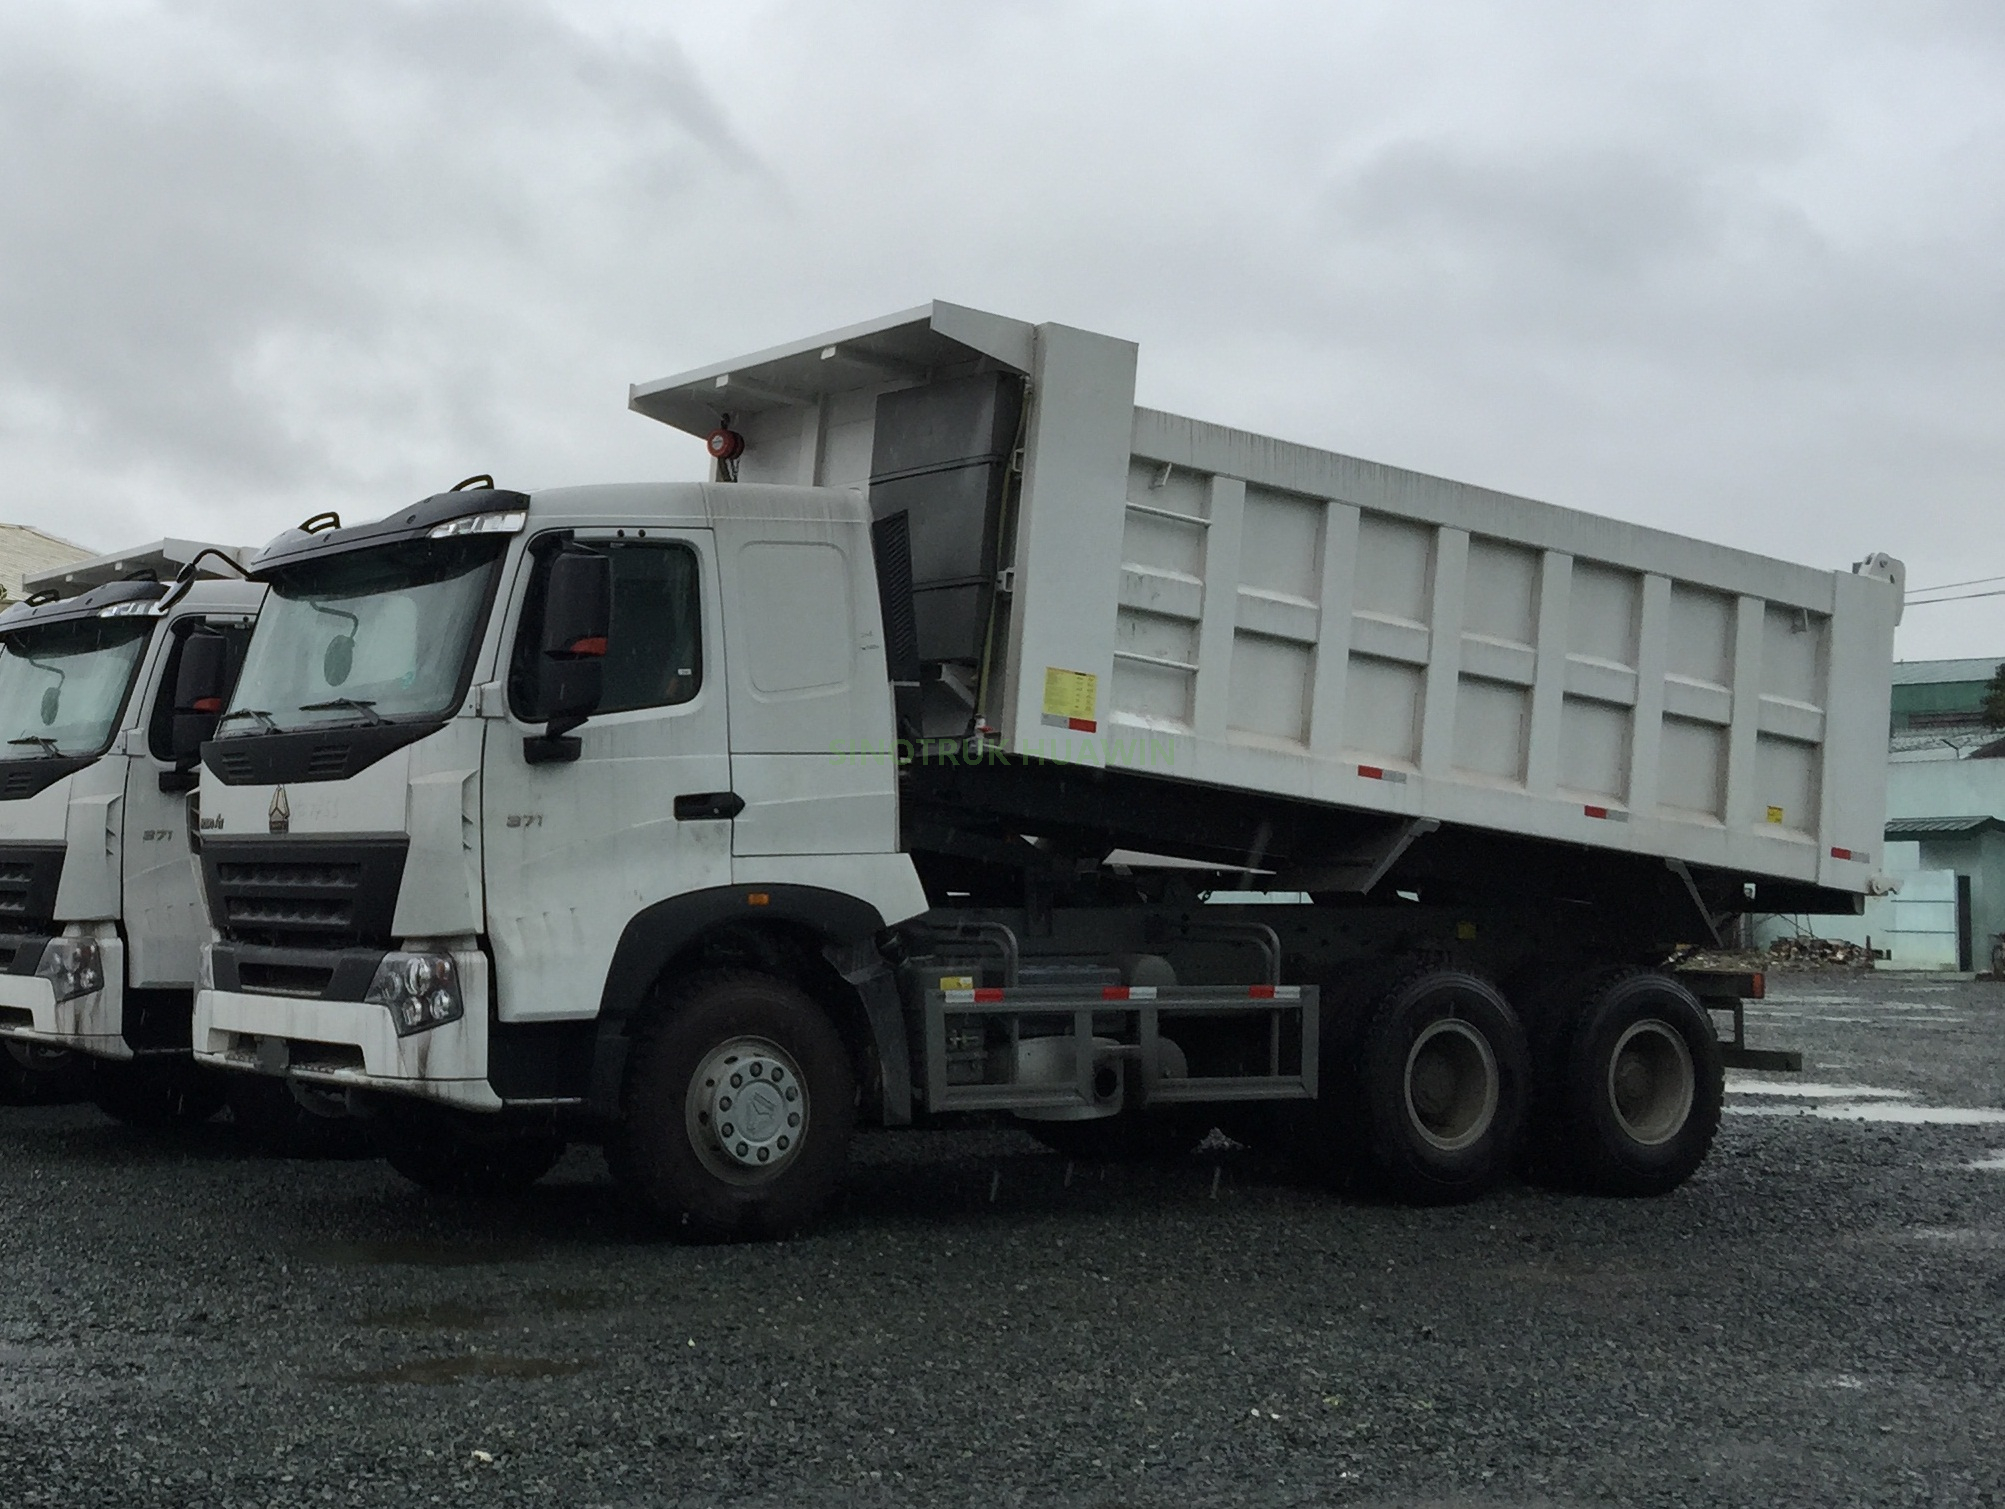 Sinotruk A7 6X4 Front tipping Dump Truck for Africa